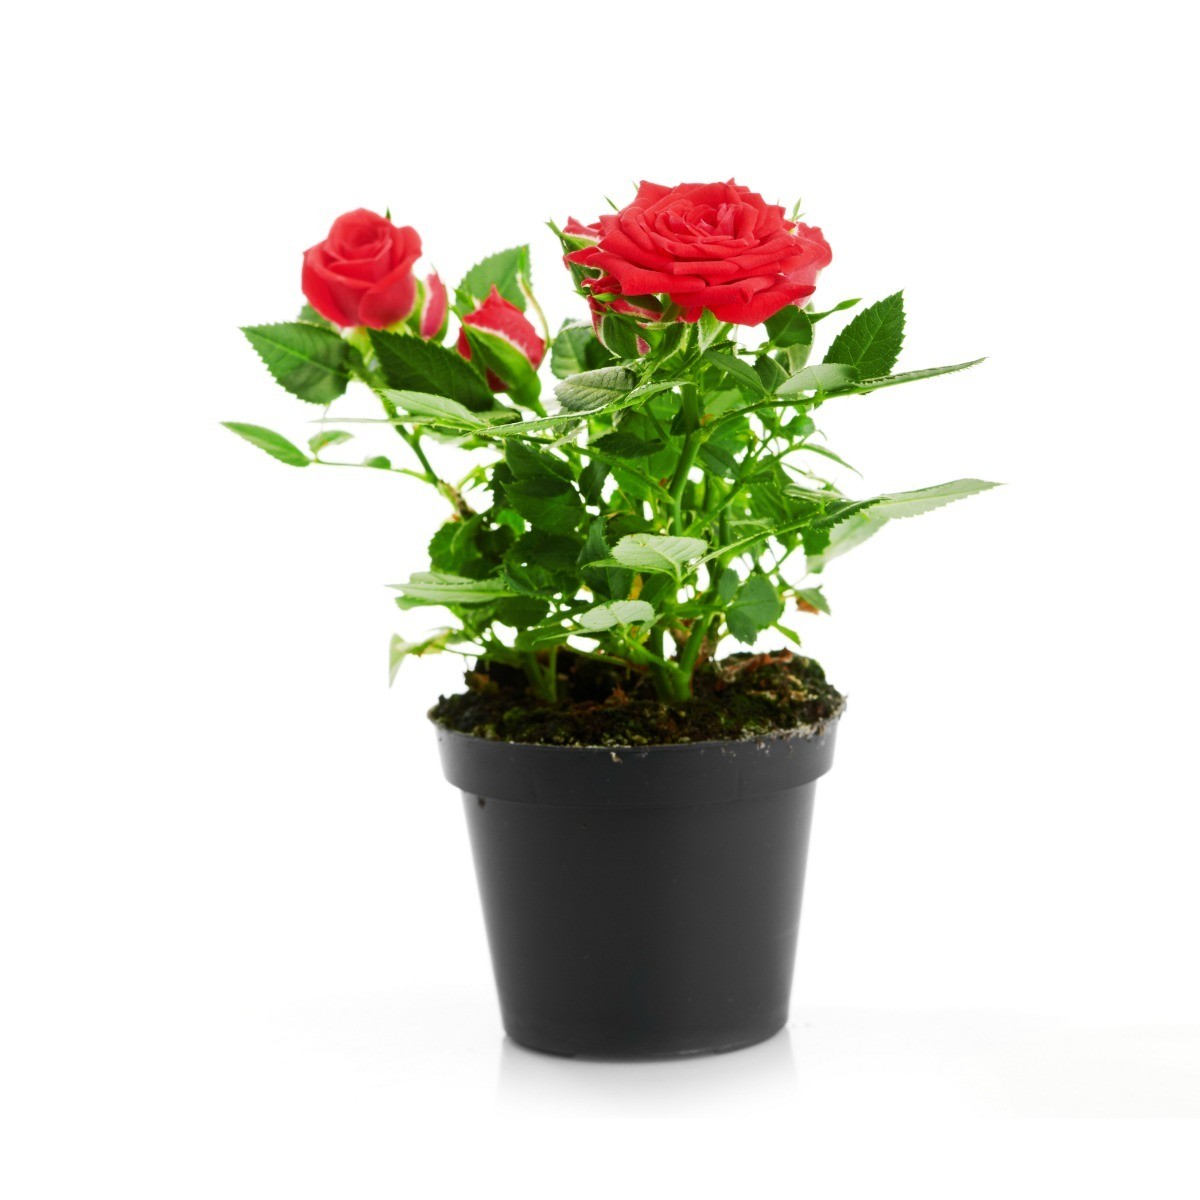 How often should you water an indoor rose plant